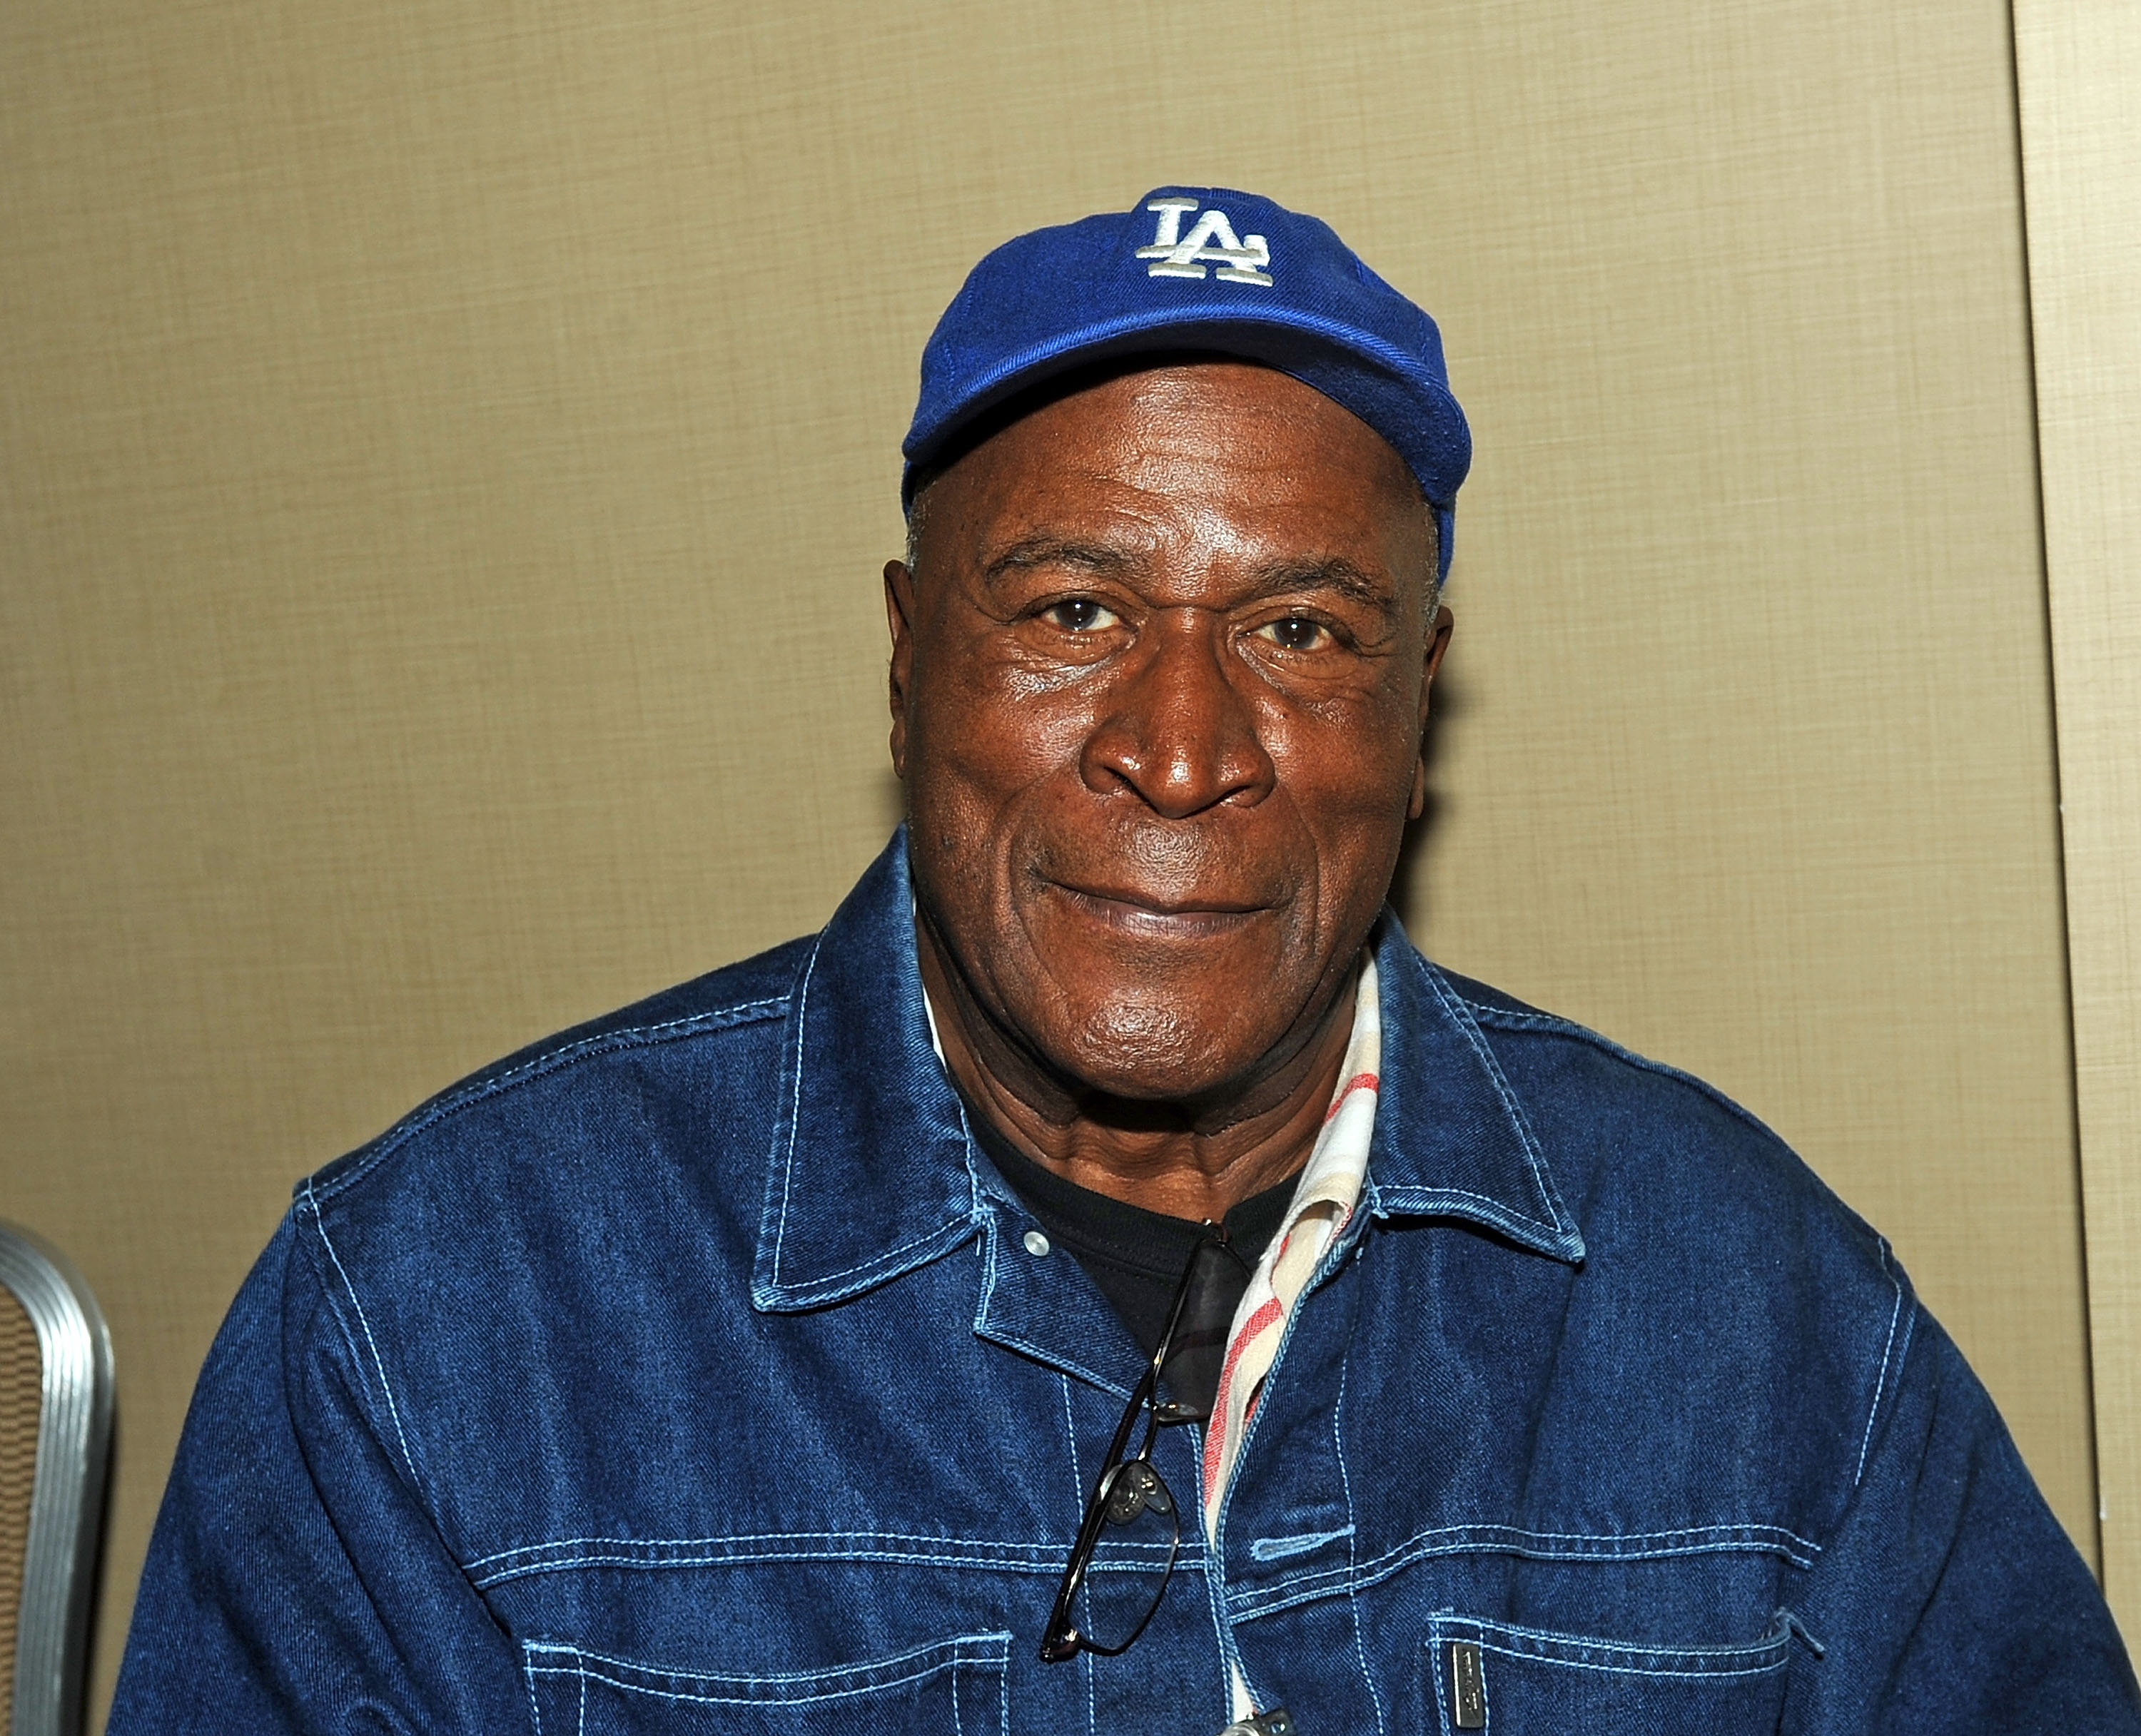 John Amos at the Chiller Theatre Expo on October 24, 2014, in Parsippany, New Jersey | Source: Getty Images